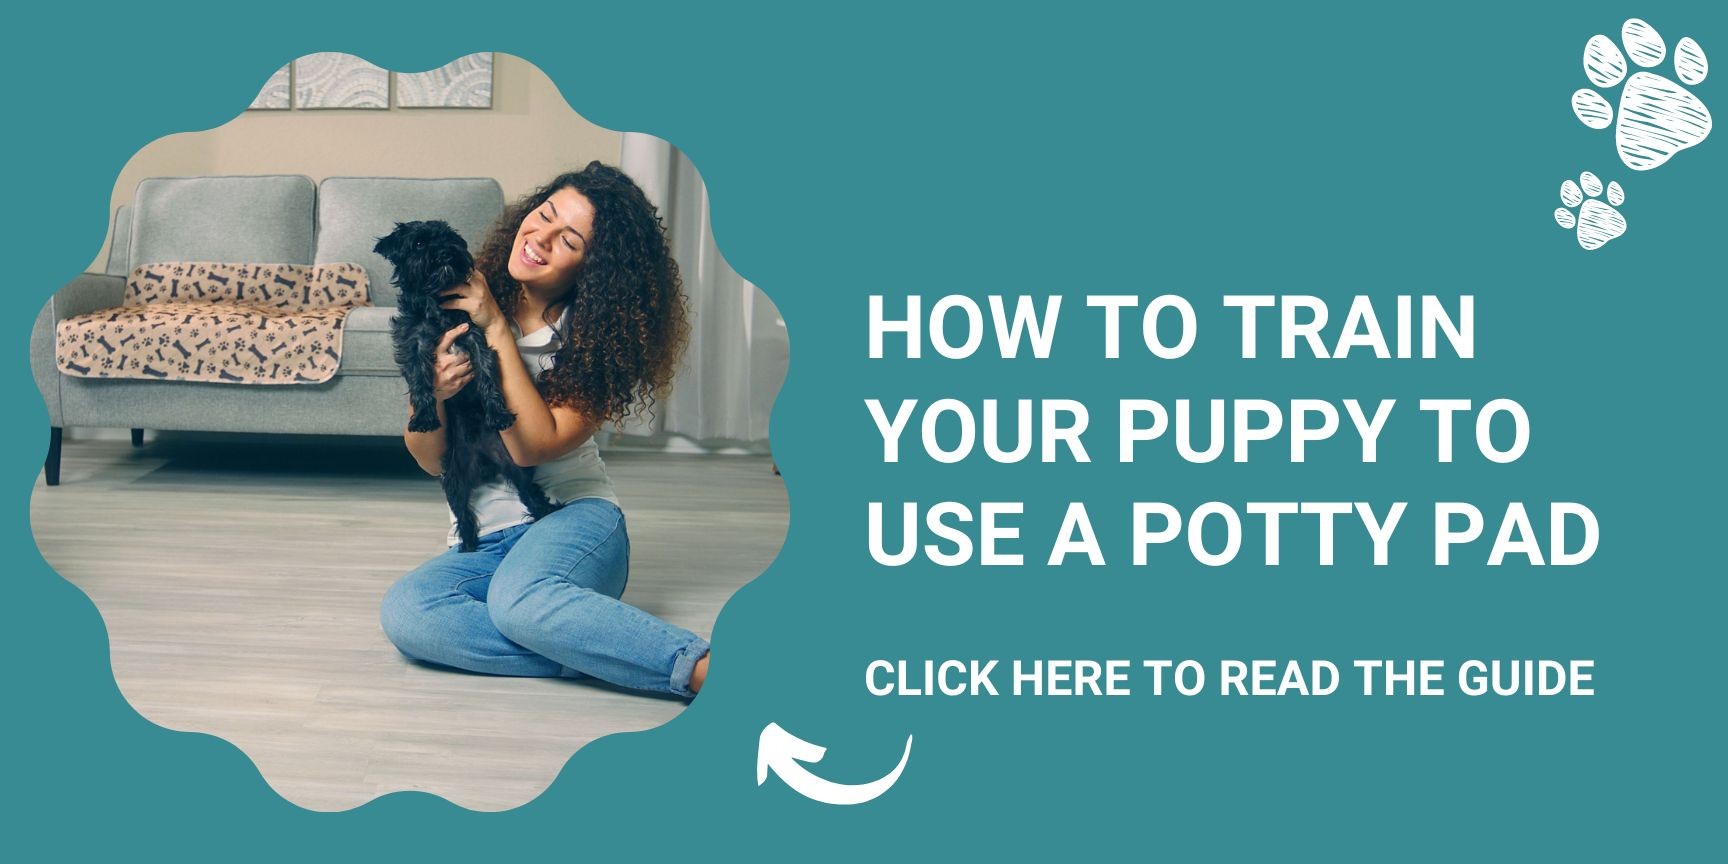 Woman hugging dog sitting on floor in front of sofa with a potty pad